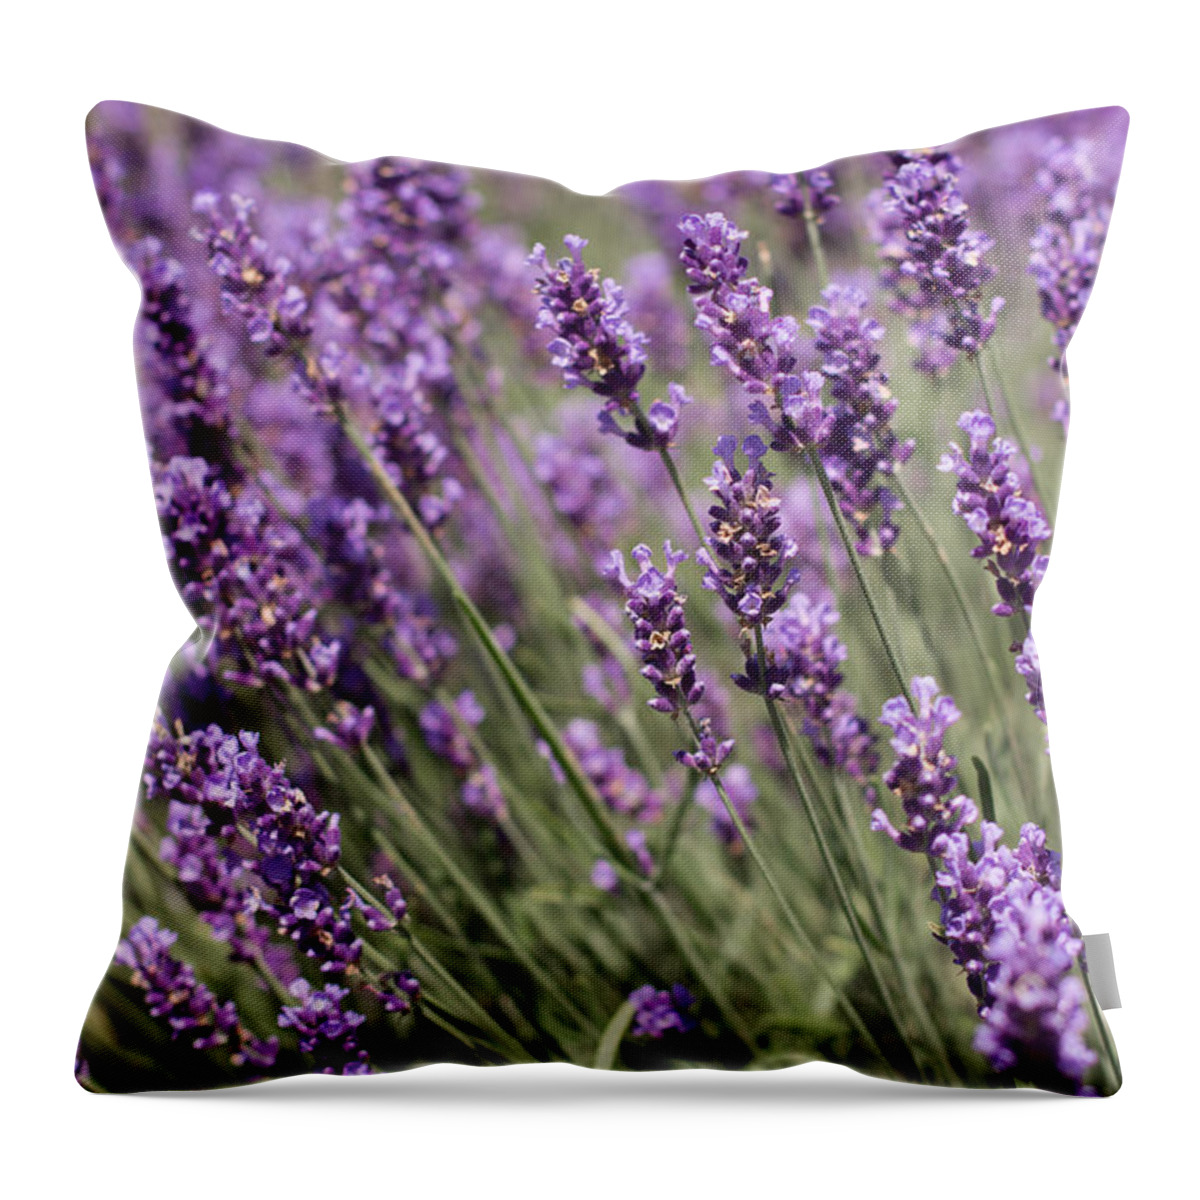 Lavender Throw Pillow featuring the photograph French Lavender by Barbara McMahon